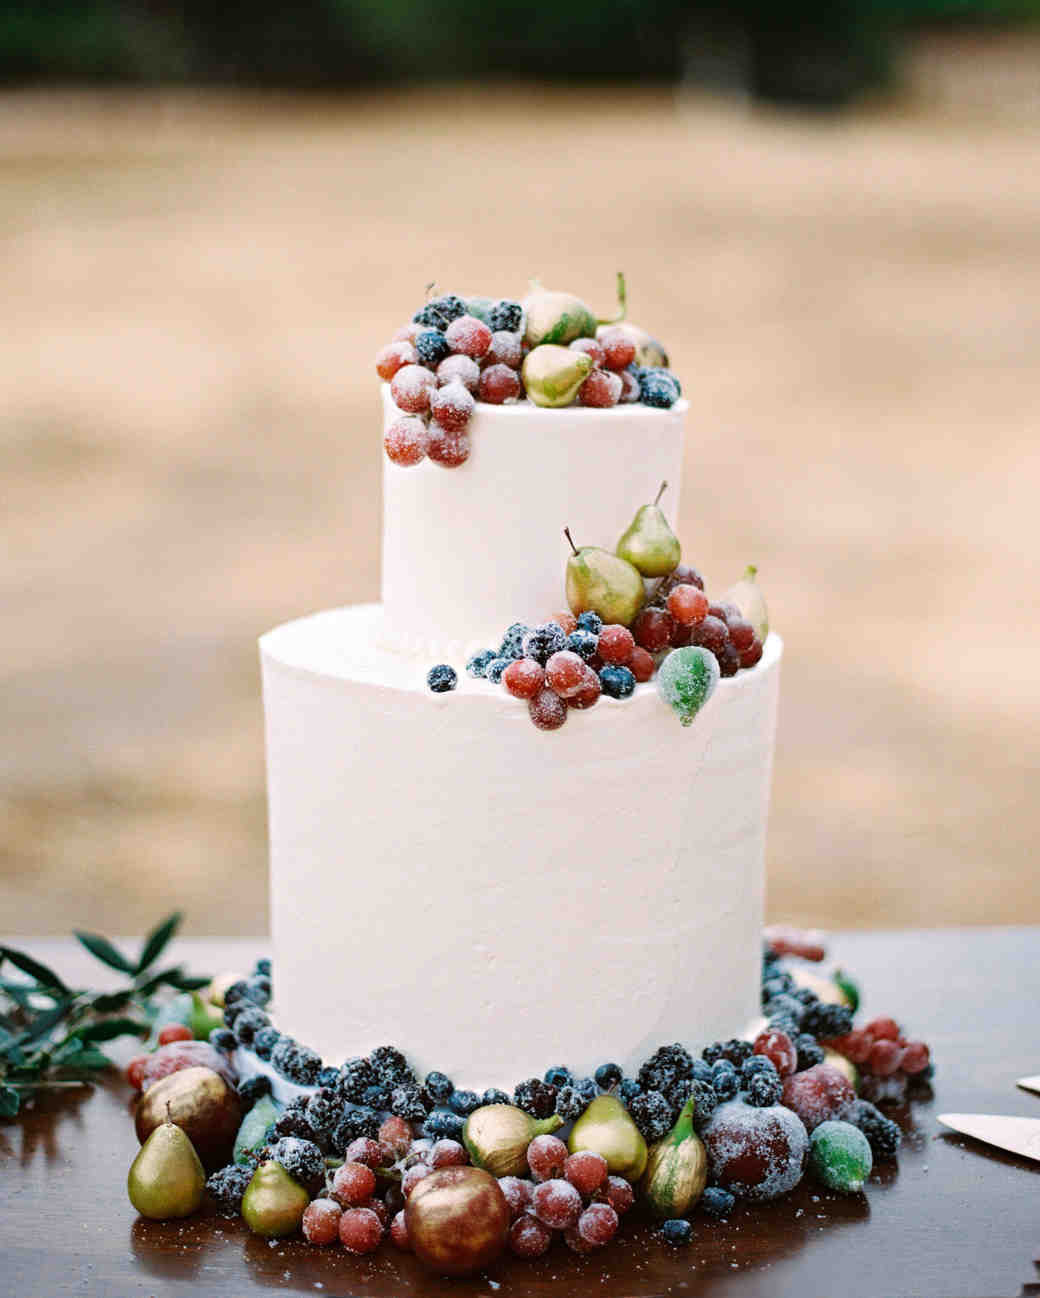 Wedding Cakes With Fruit
 42 Fruit Wedding Cakes That Are Full of Color and Flavor